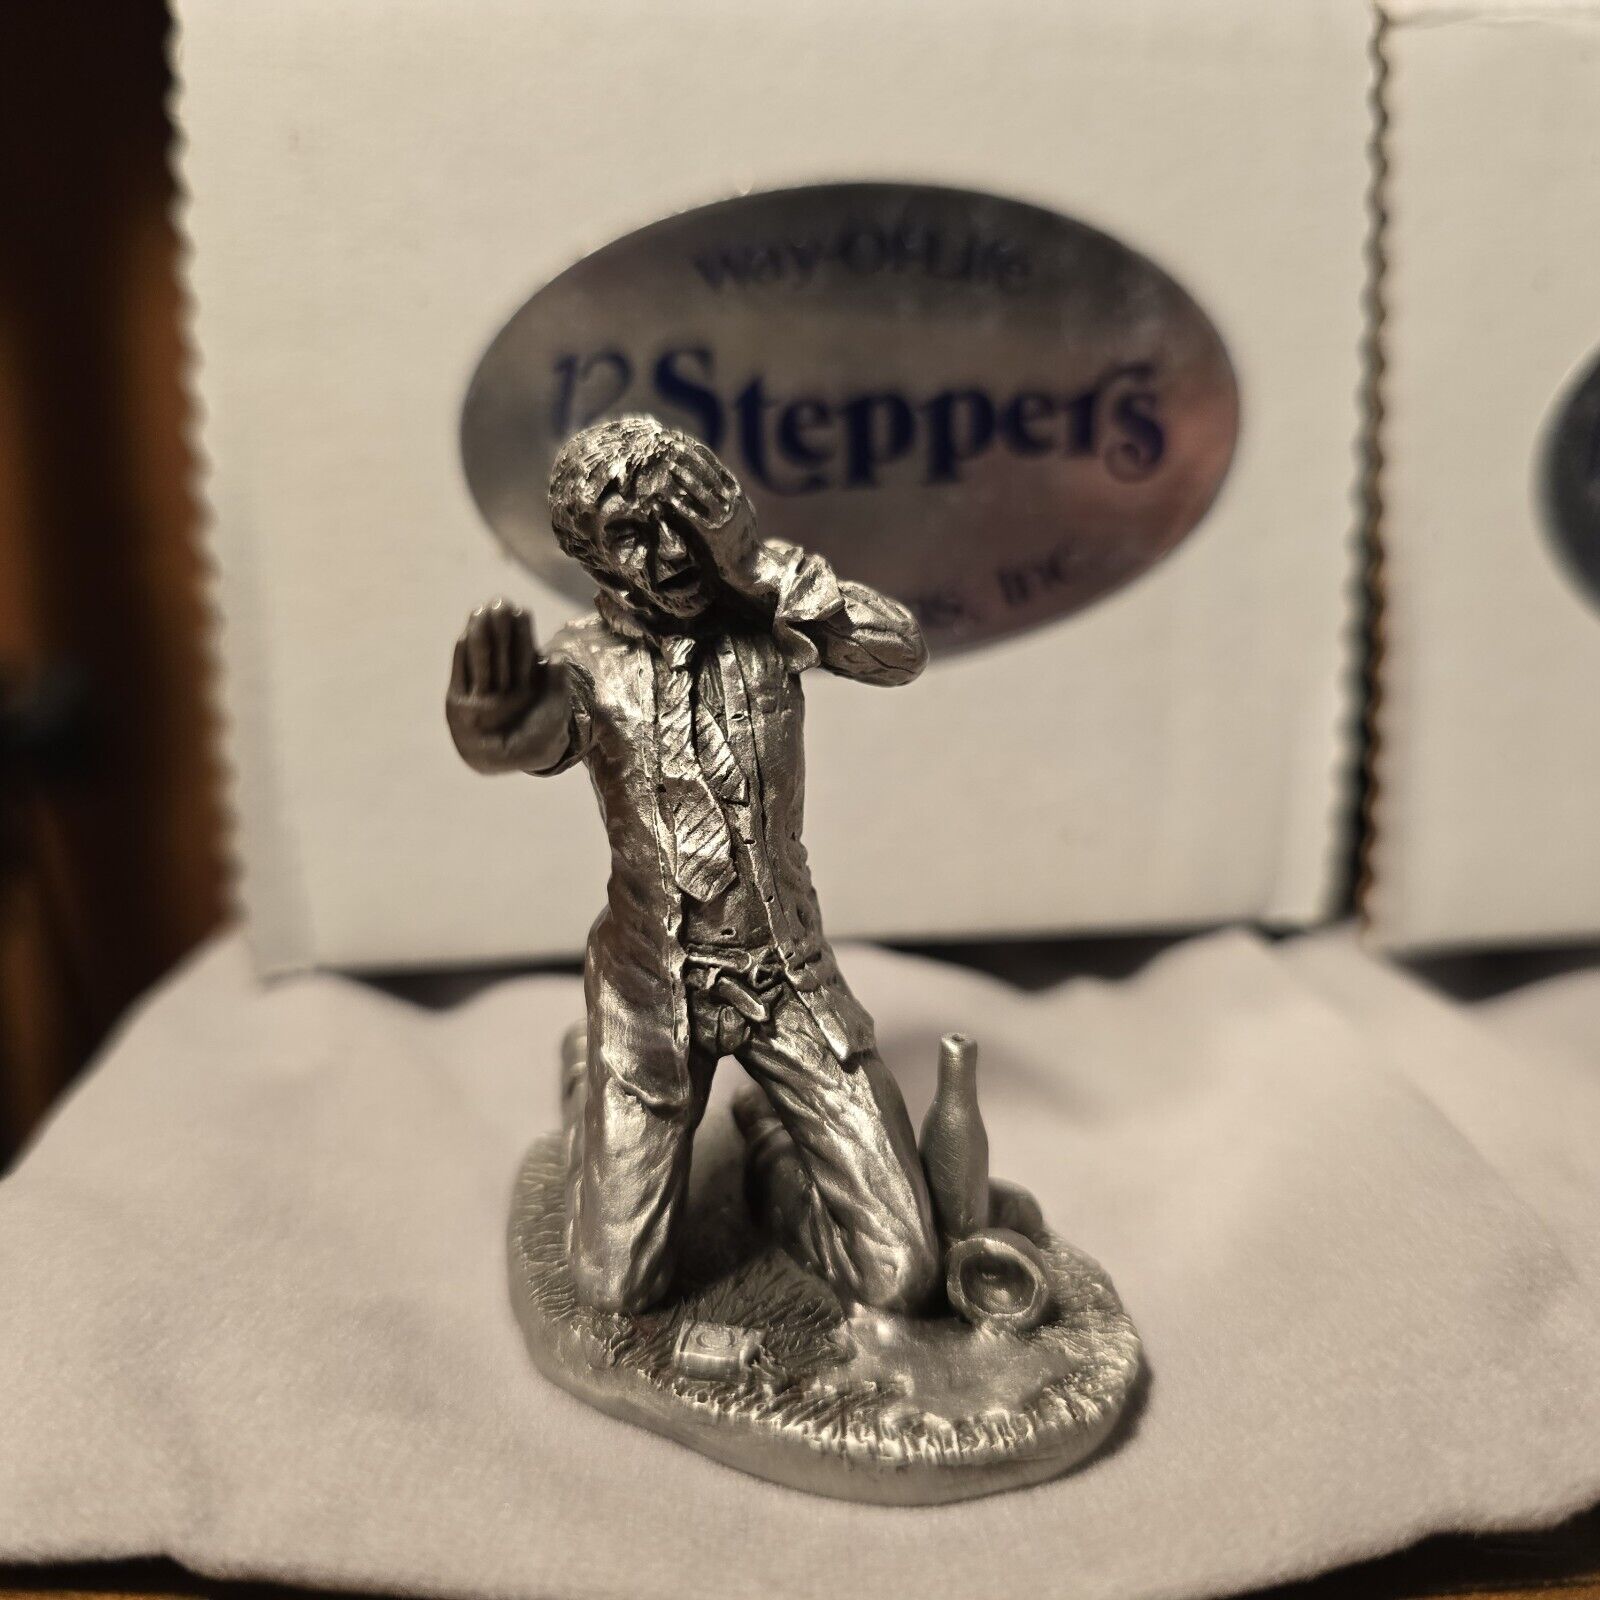 WaY Of Life Acoholics Anonymous, 12 Stepper, Pewter Figurine Set, RARE, AA NA